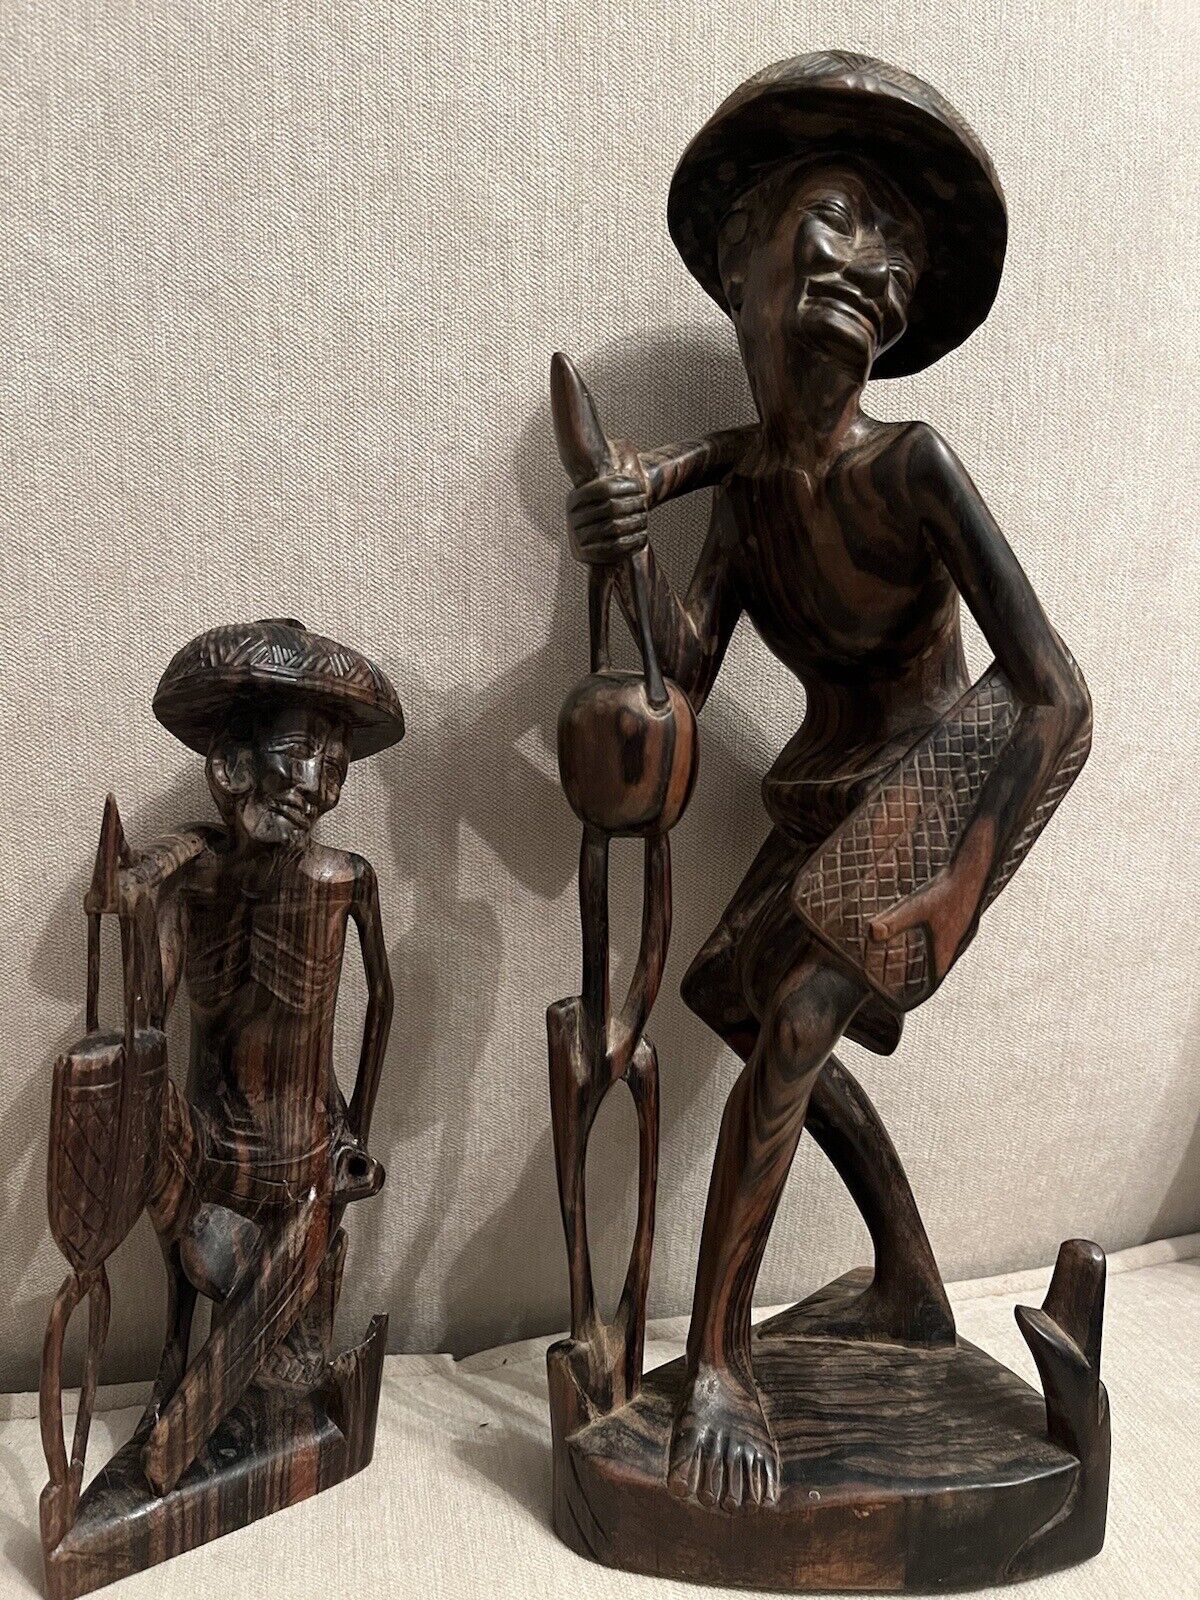 Two Vintage Asian Wood Fishermen’s Figurines Carved With Original Fishing Gear.